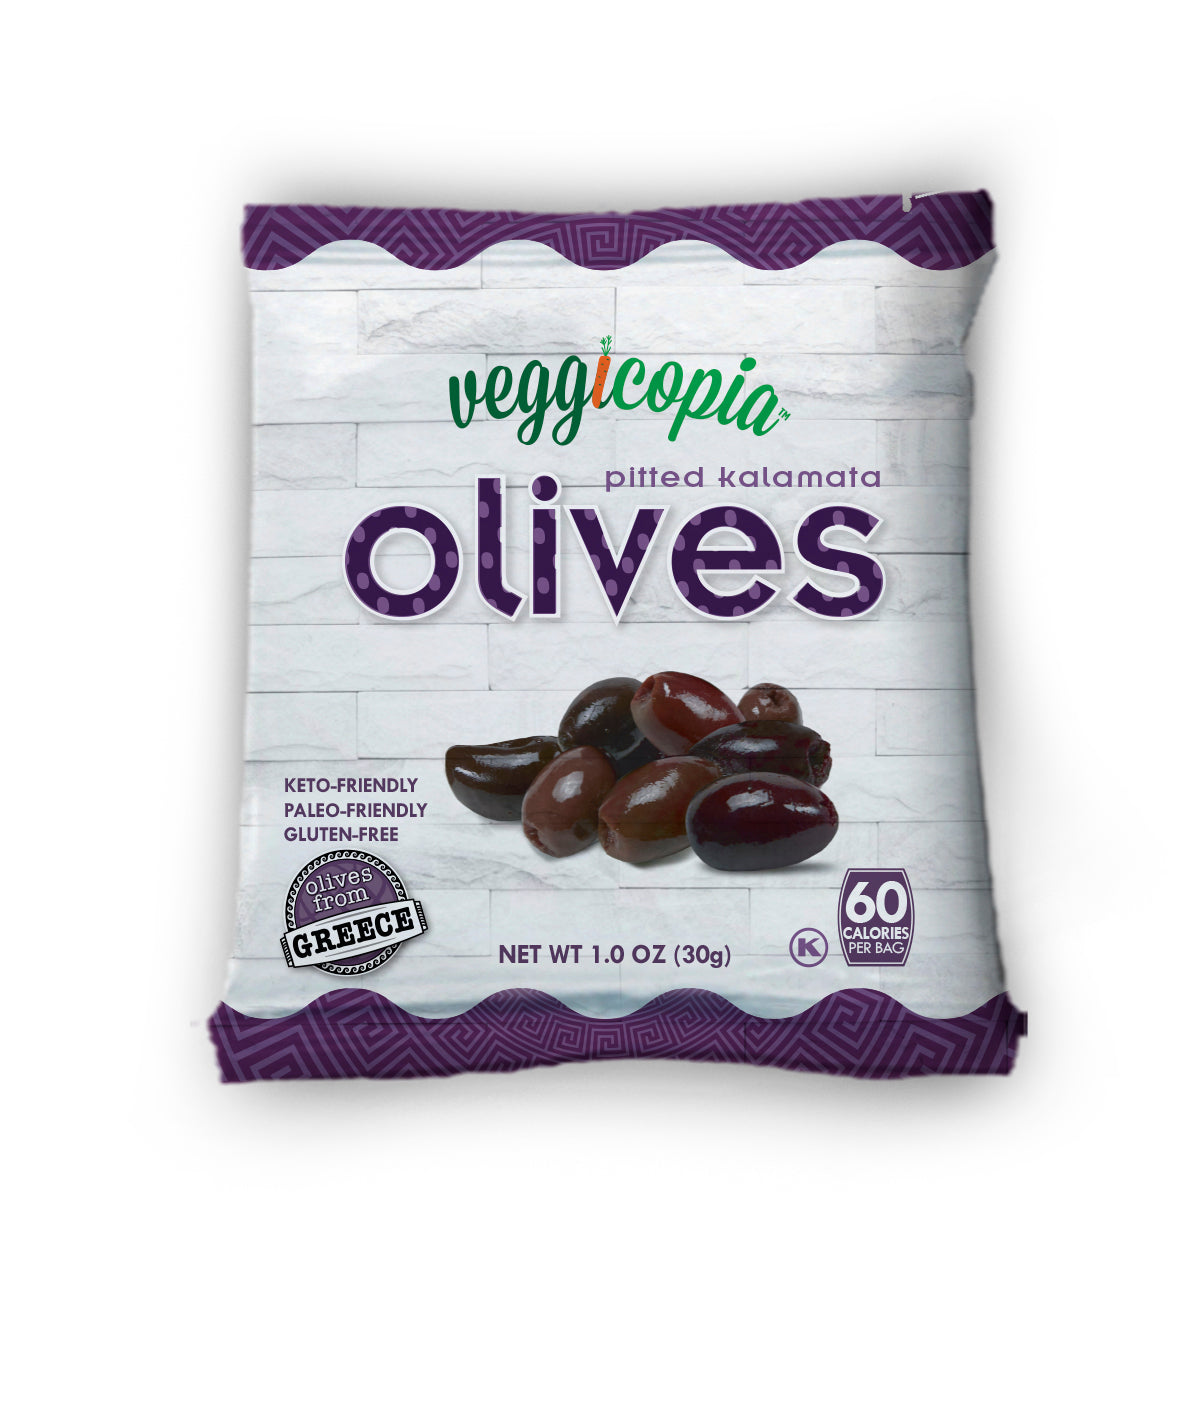 Kalamata Pitted Olives from Greece 1.05 oz (24 Pack)